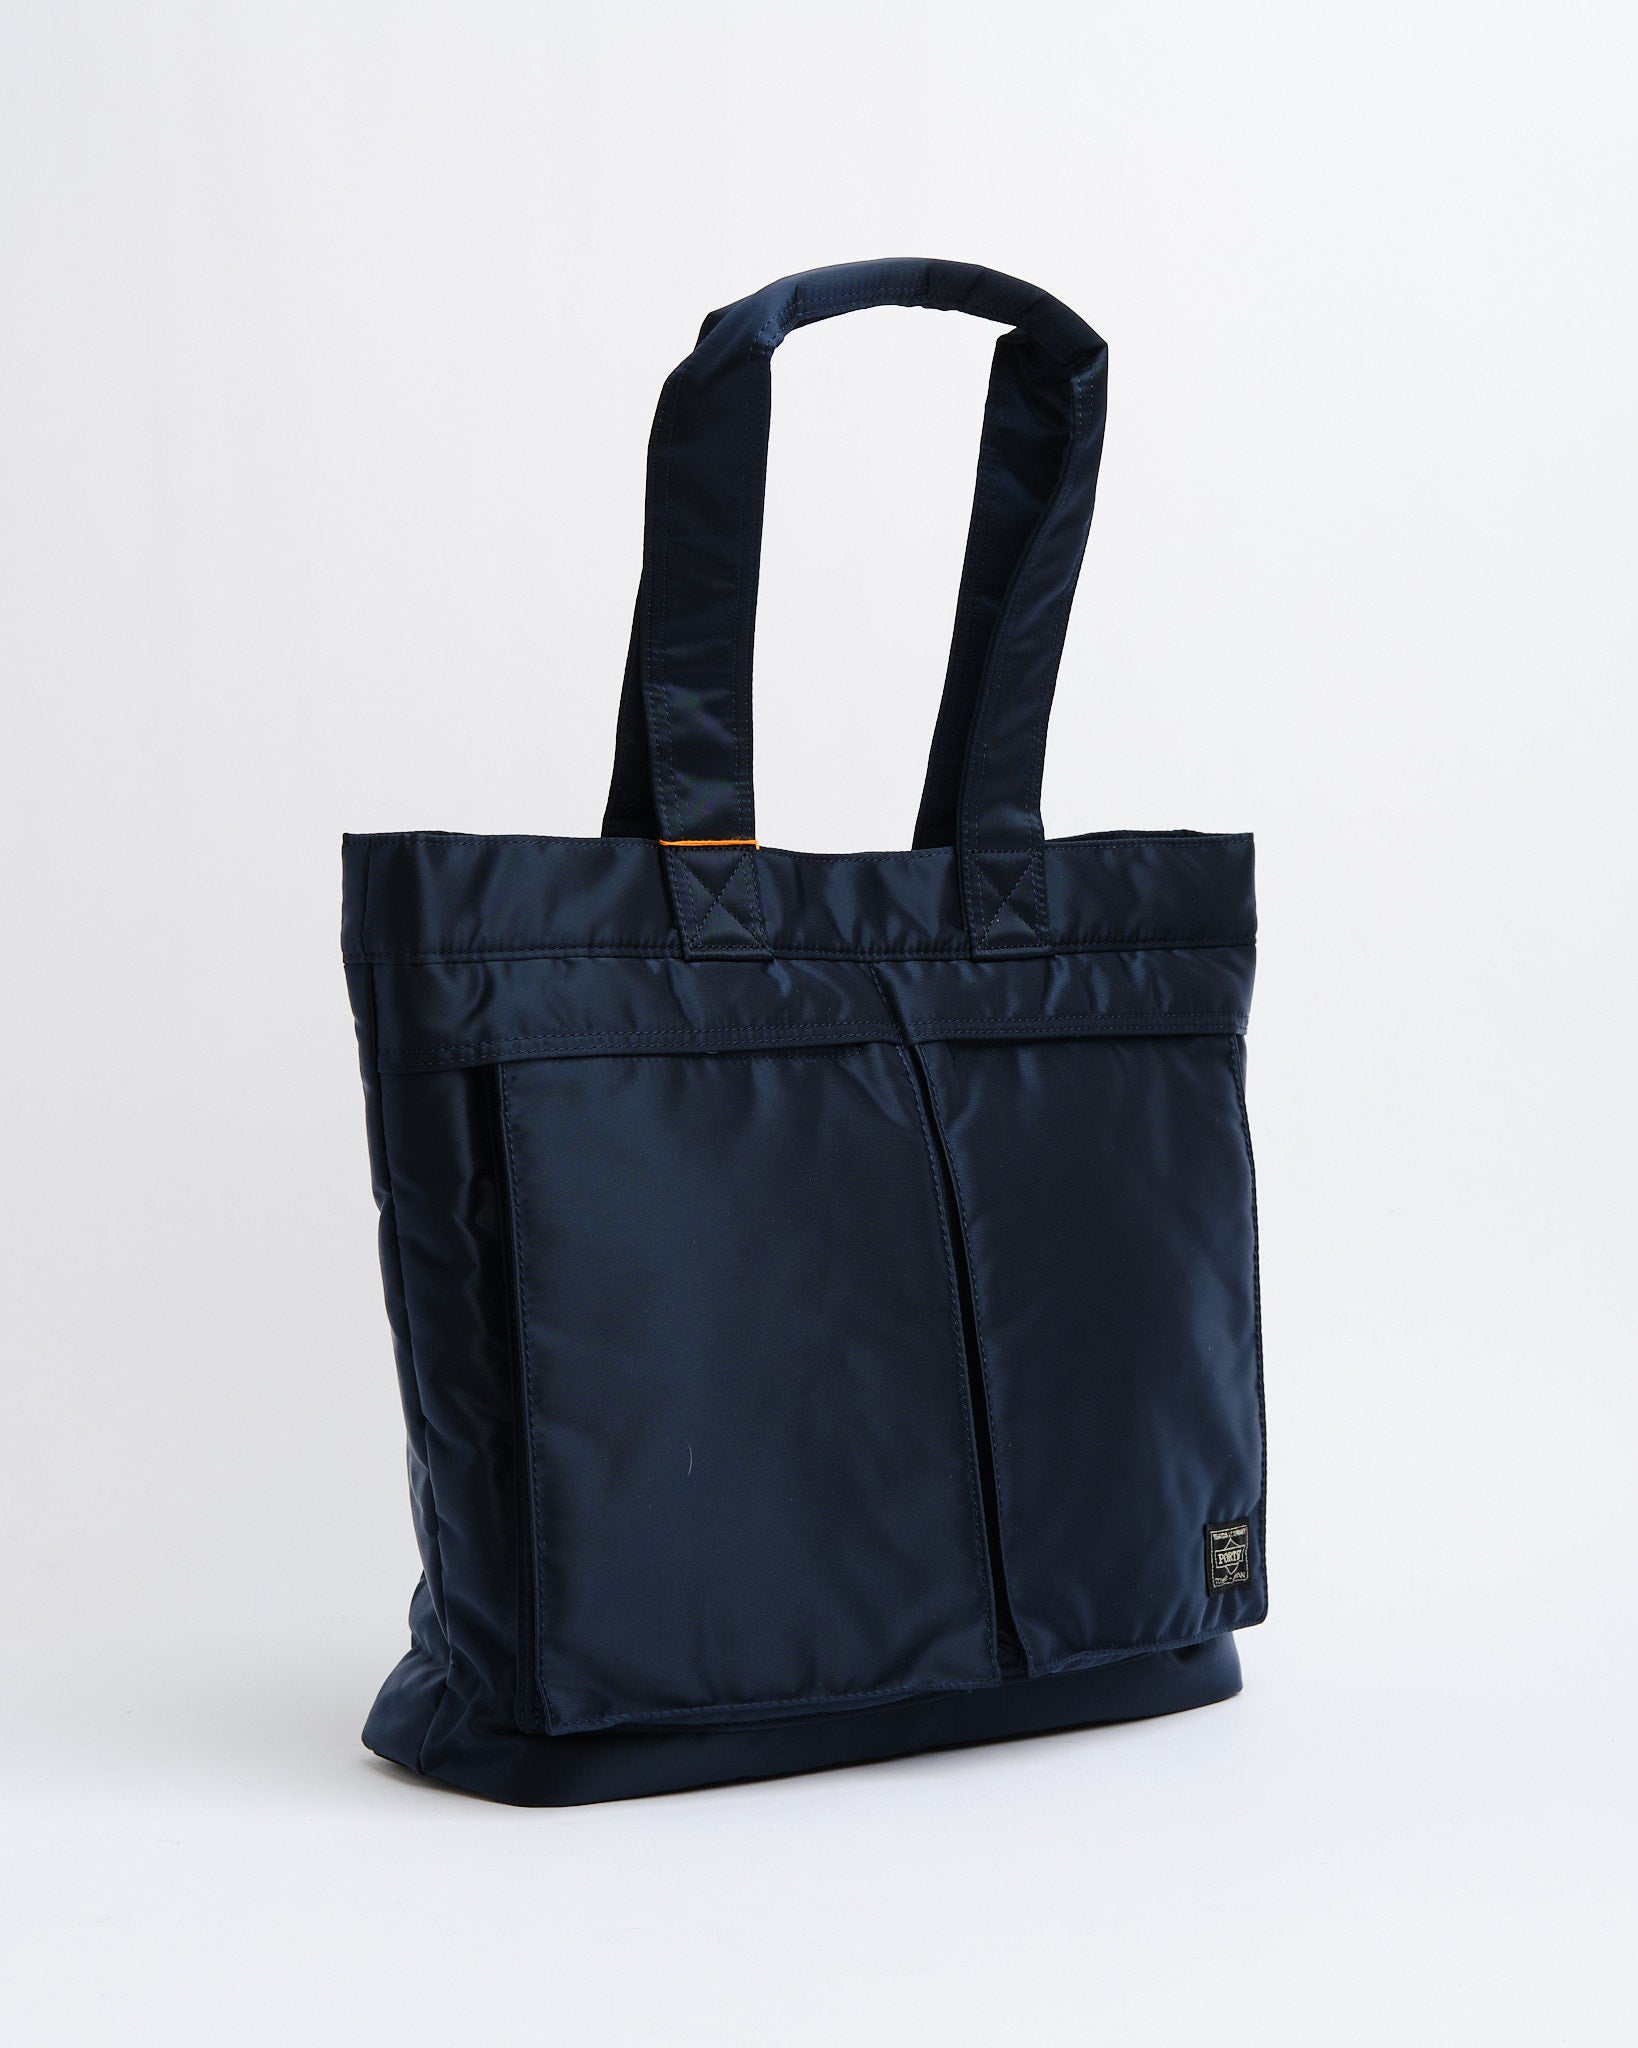 TANKER TOTE BAG IRON BLUE - Meadow